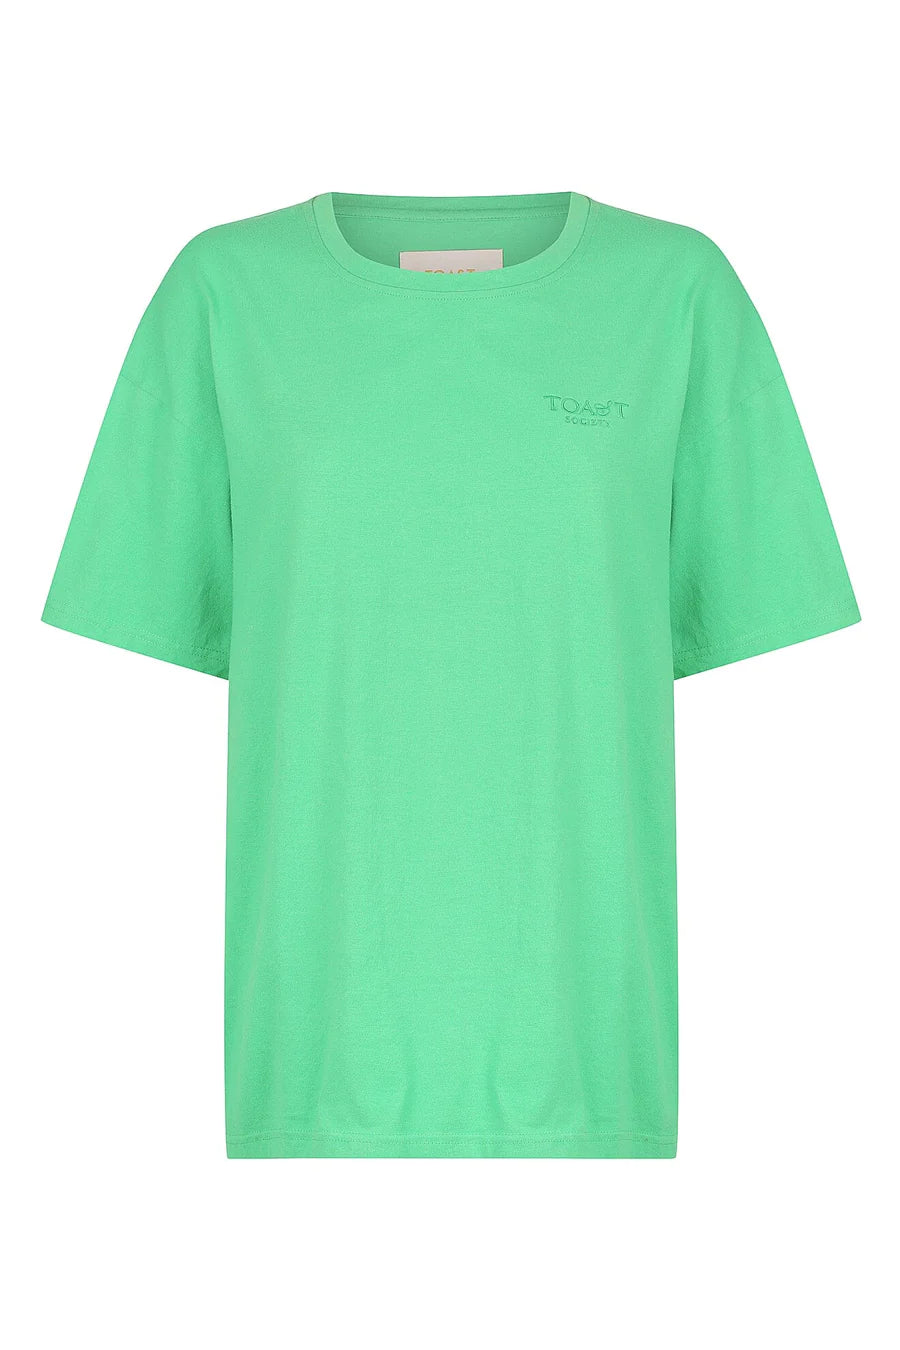 Toast Society - Move With Love Tee - Fern Green